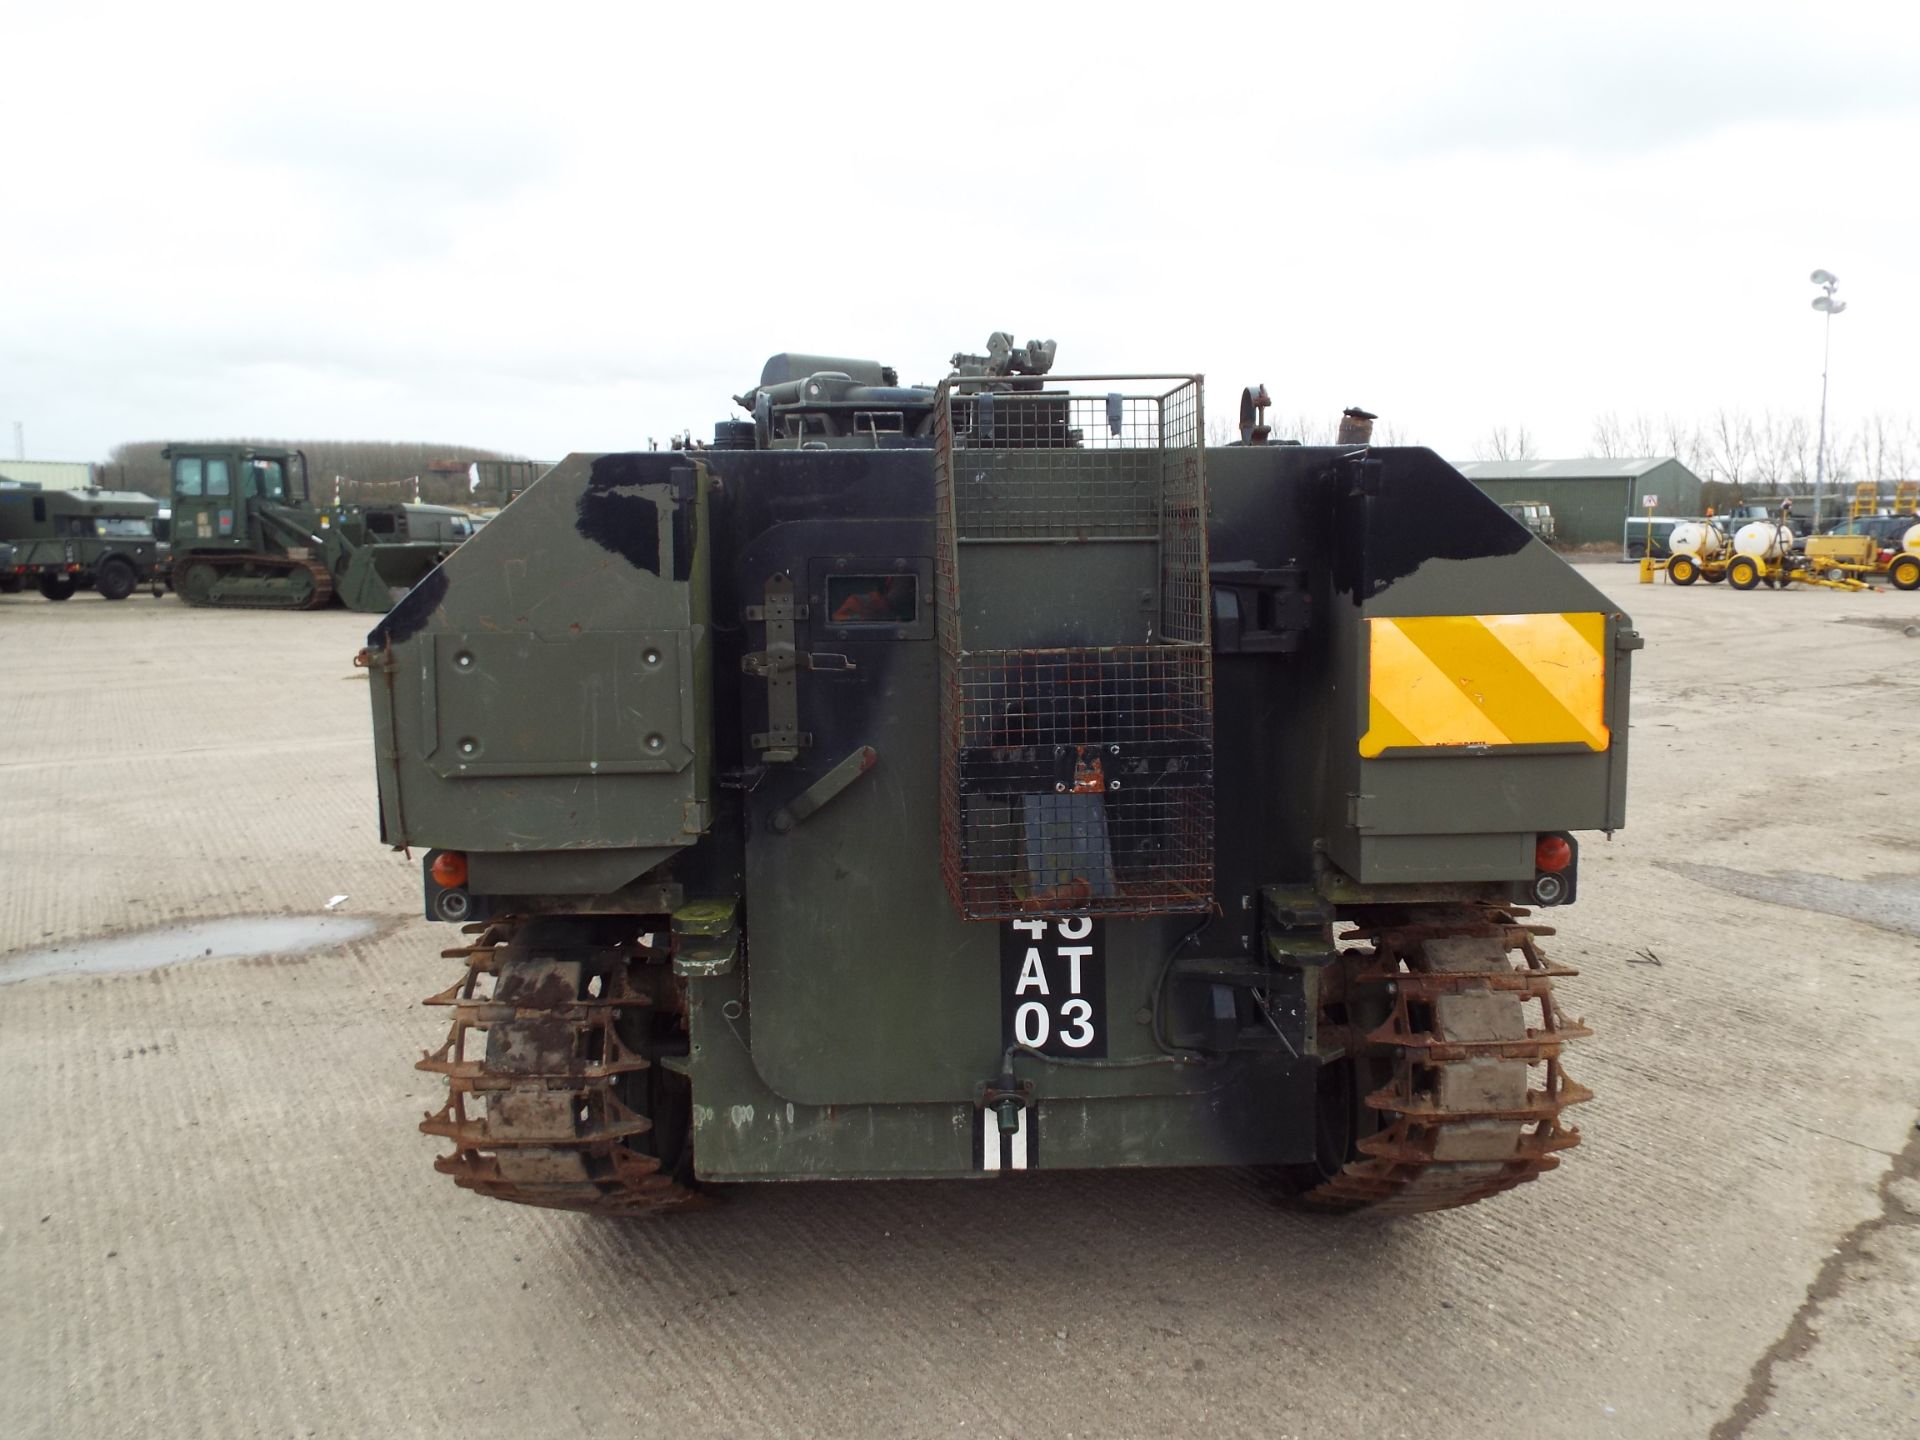 Dieselised CVRT (Combat Vehicle Reconnaissance Tracked) Spartan Armoured Personnel Carrier - Image 6 of 28